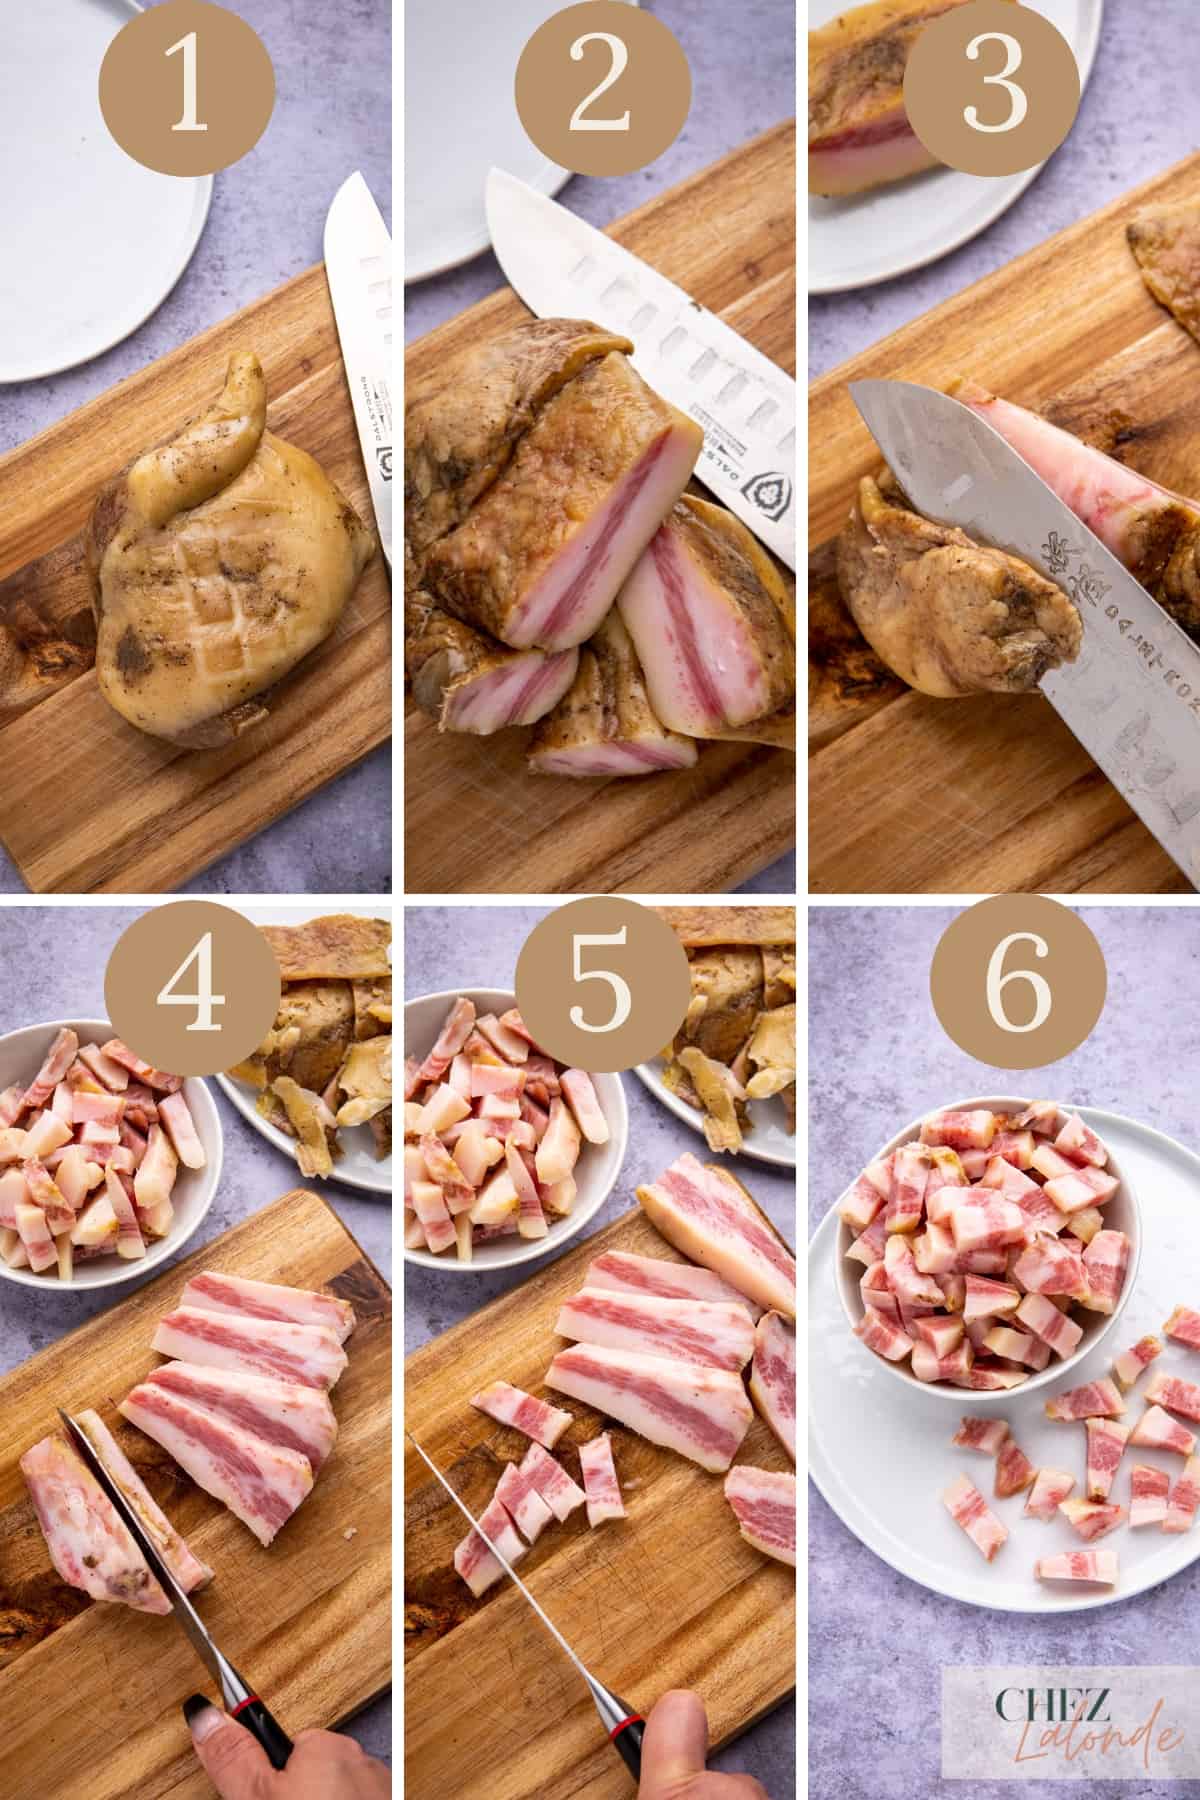 Steps on how to trim and prepare guanciale for this pasta. 